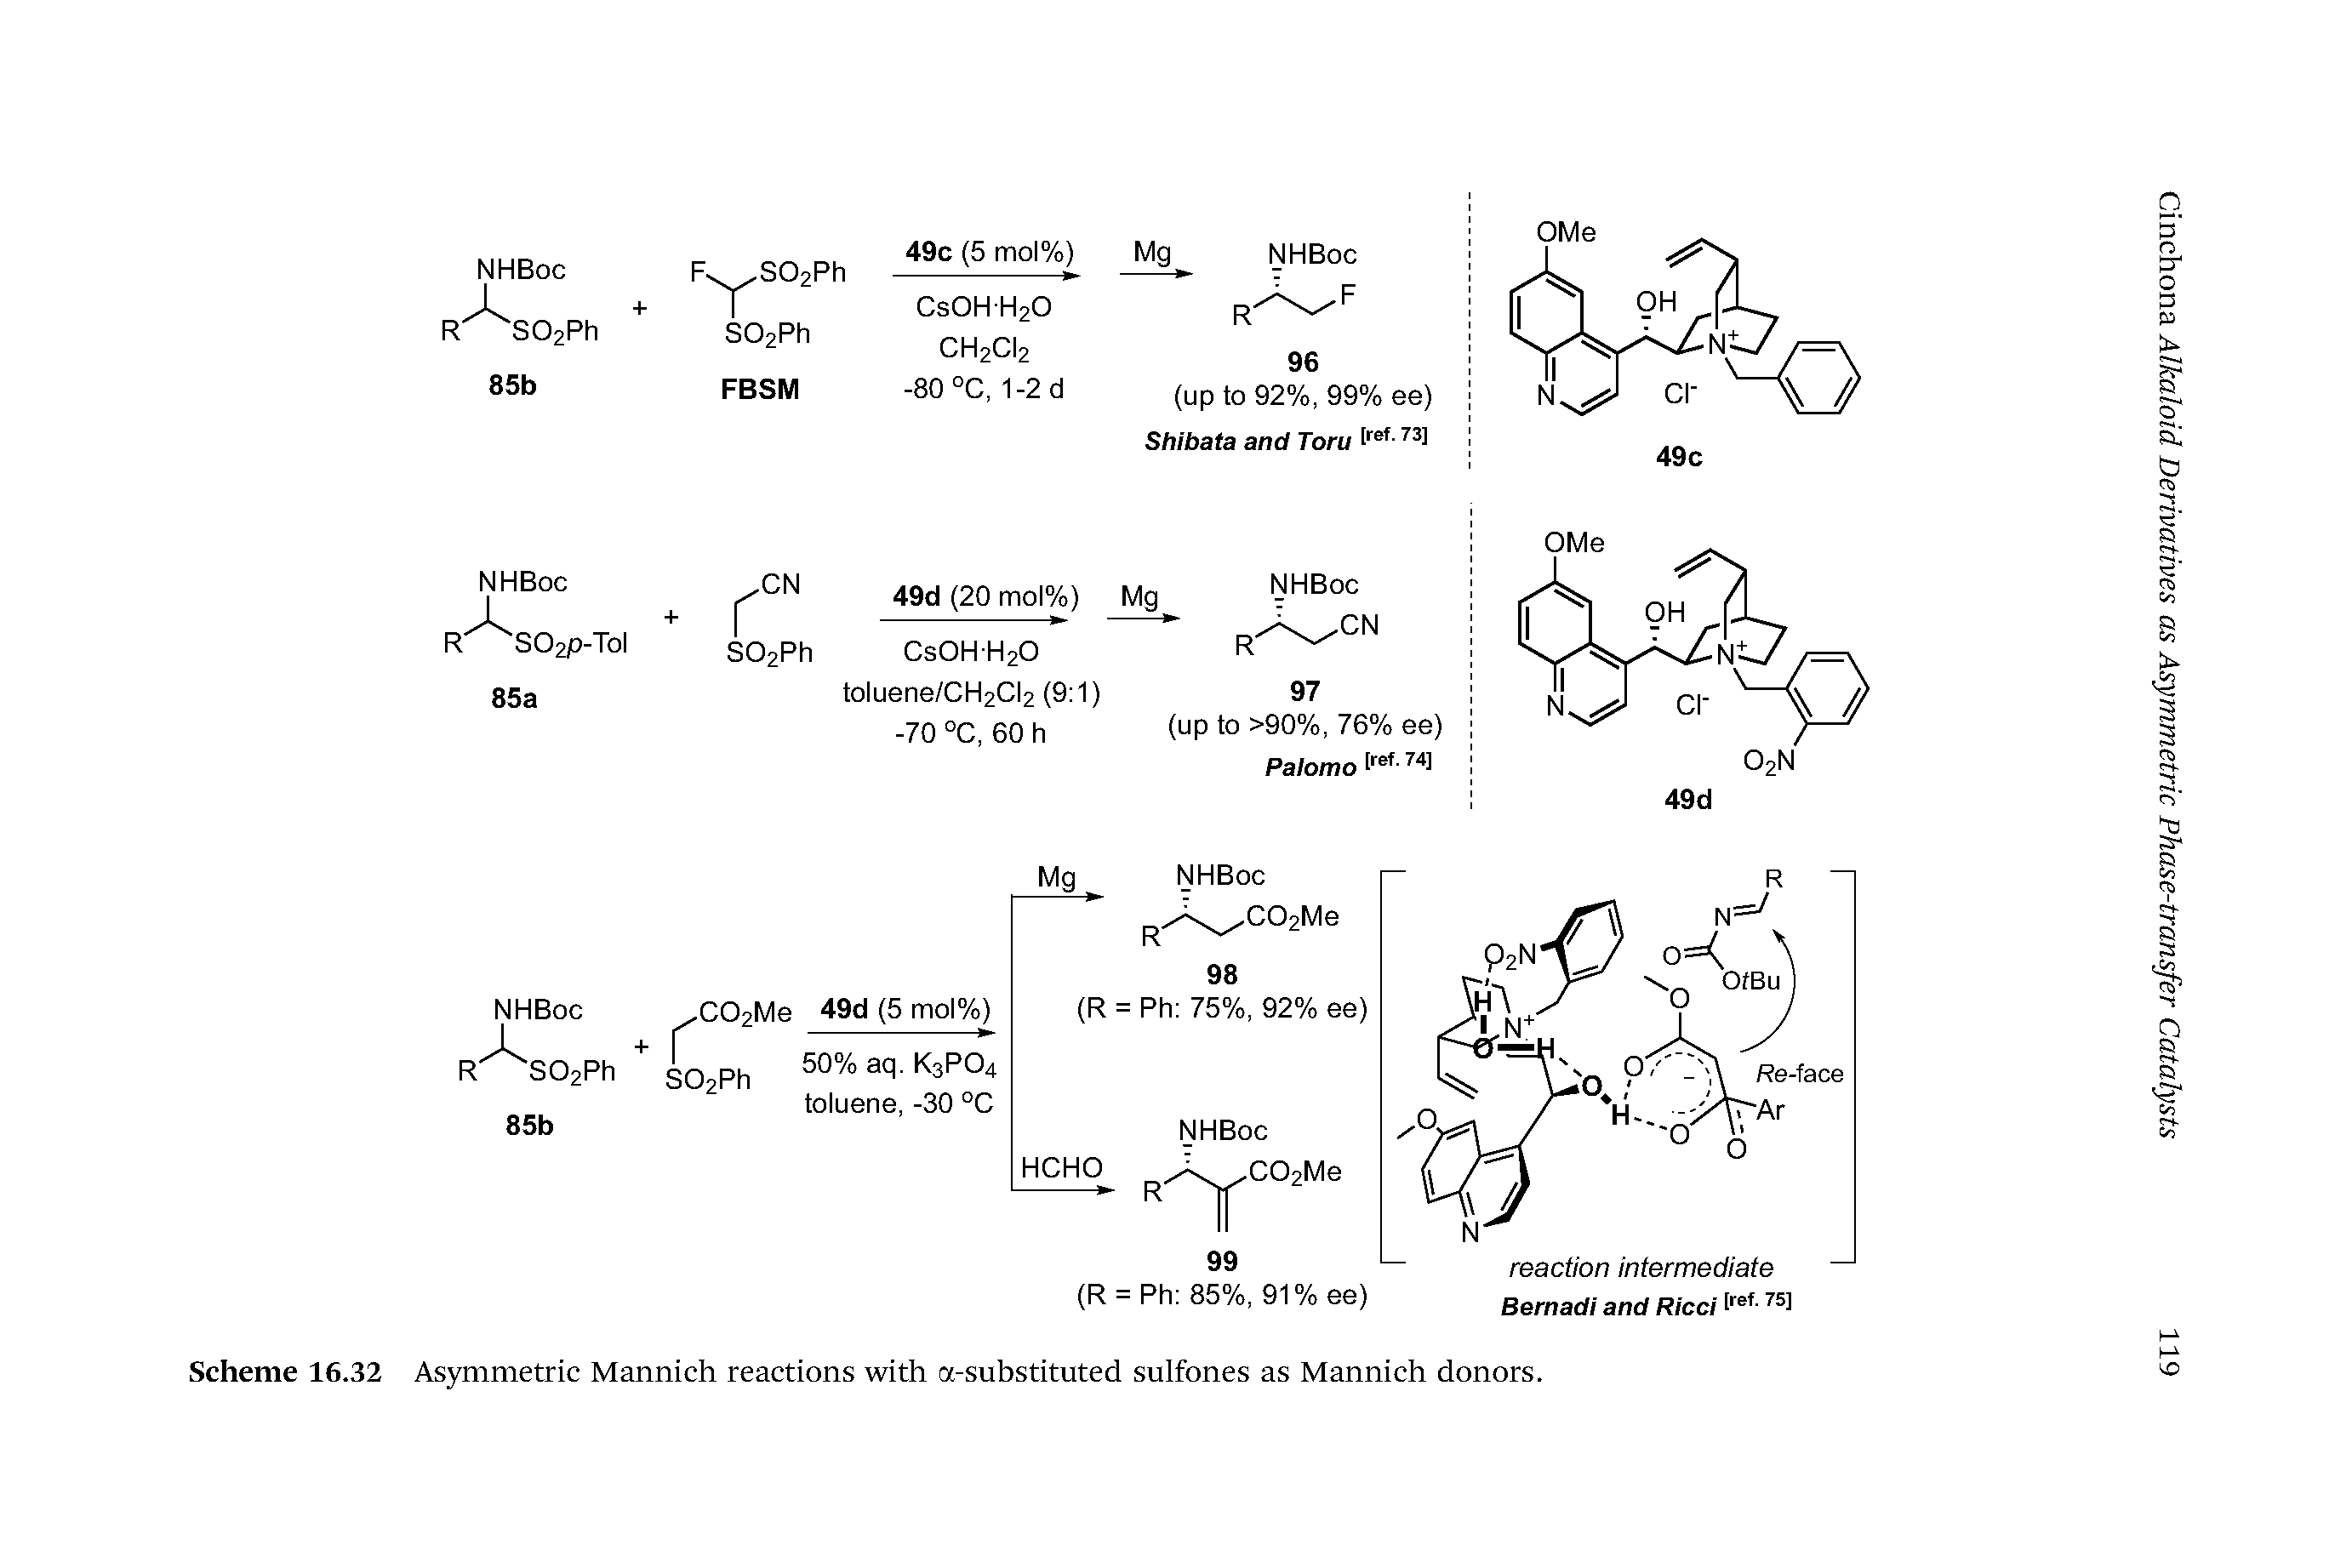 Scheme 16.32 Asymmetric Mannich reactions with a-substituted sulfones as Mannich donors.